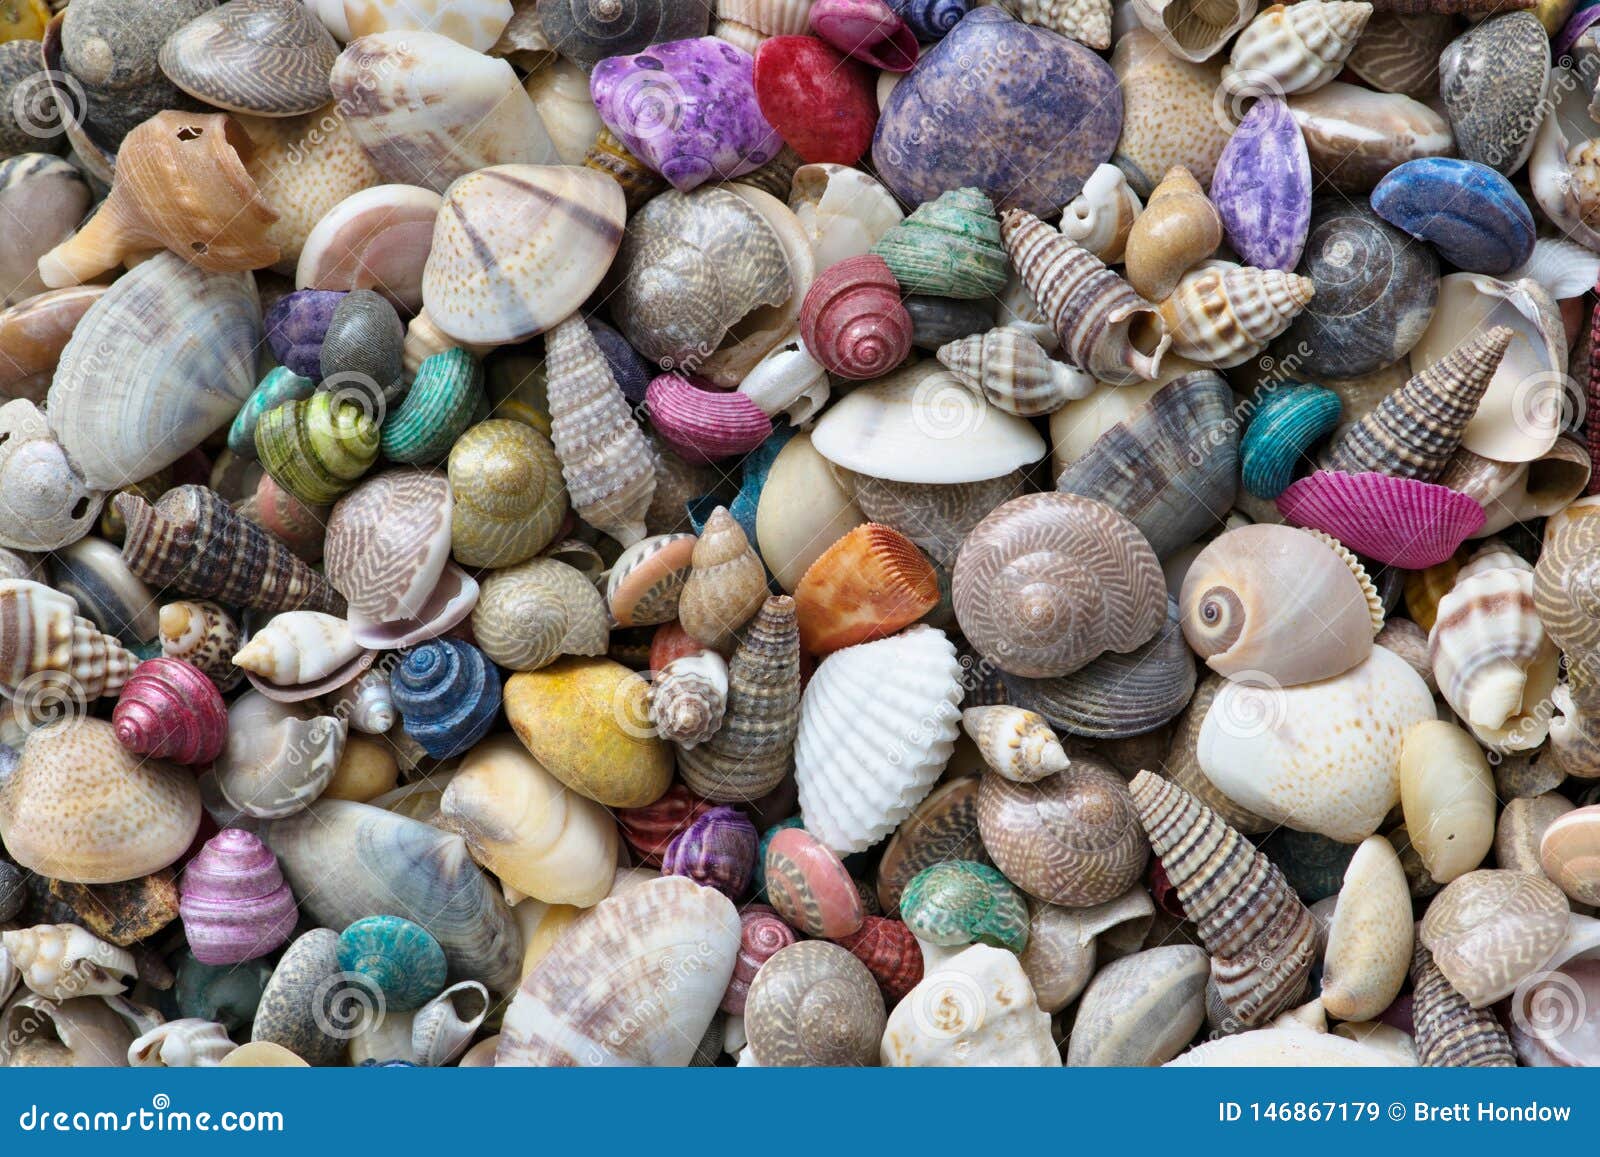 Premium Photo  Seashell background various colorful kinds and shapes  seashell on white small gravel sand beach background